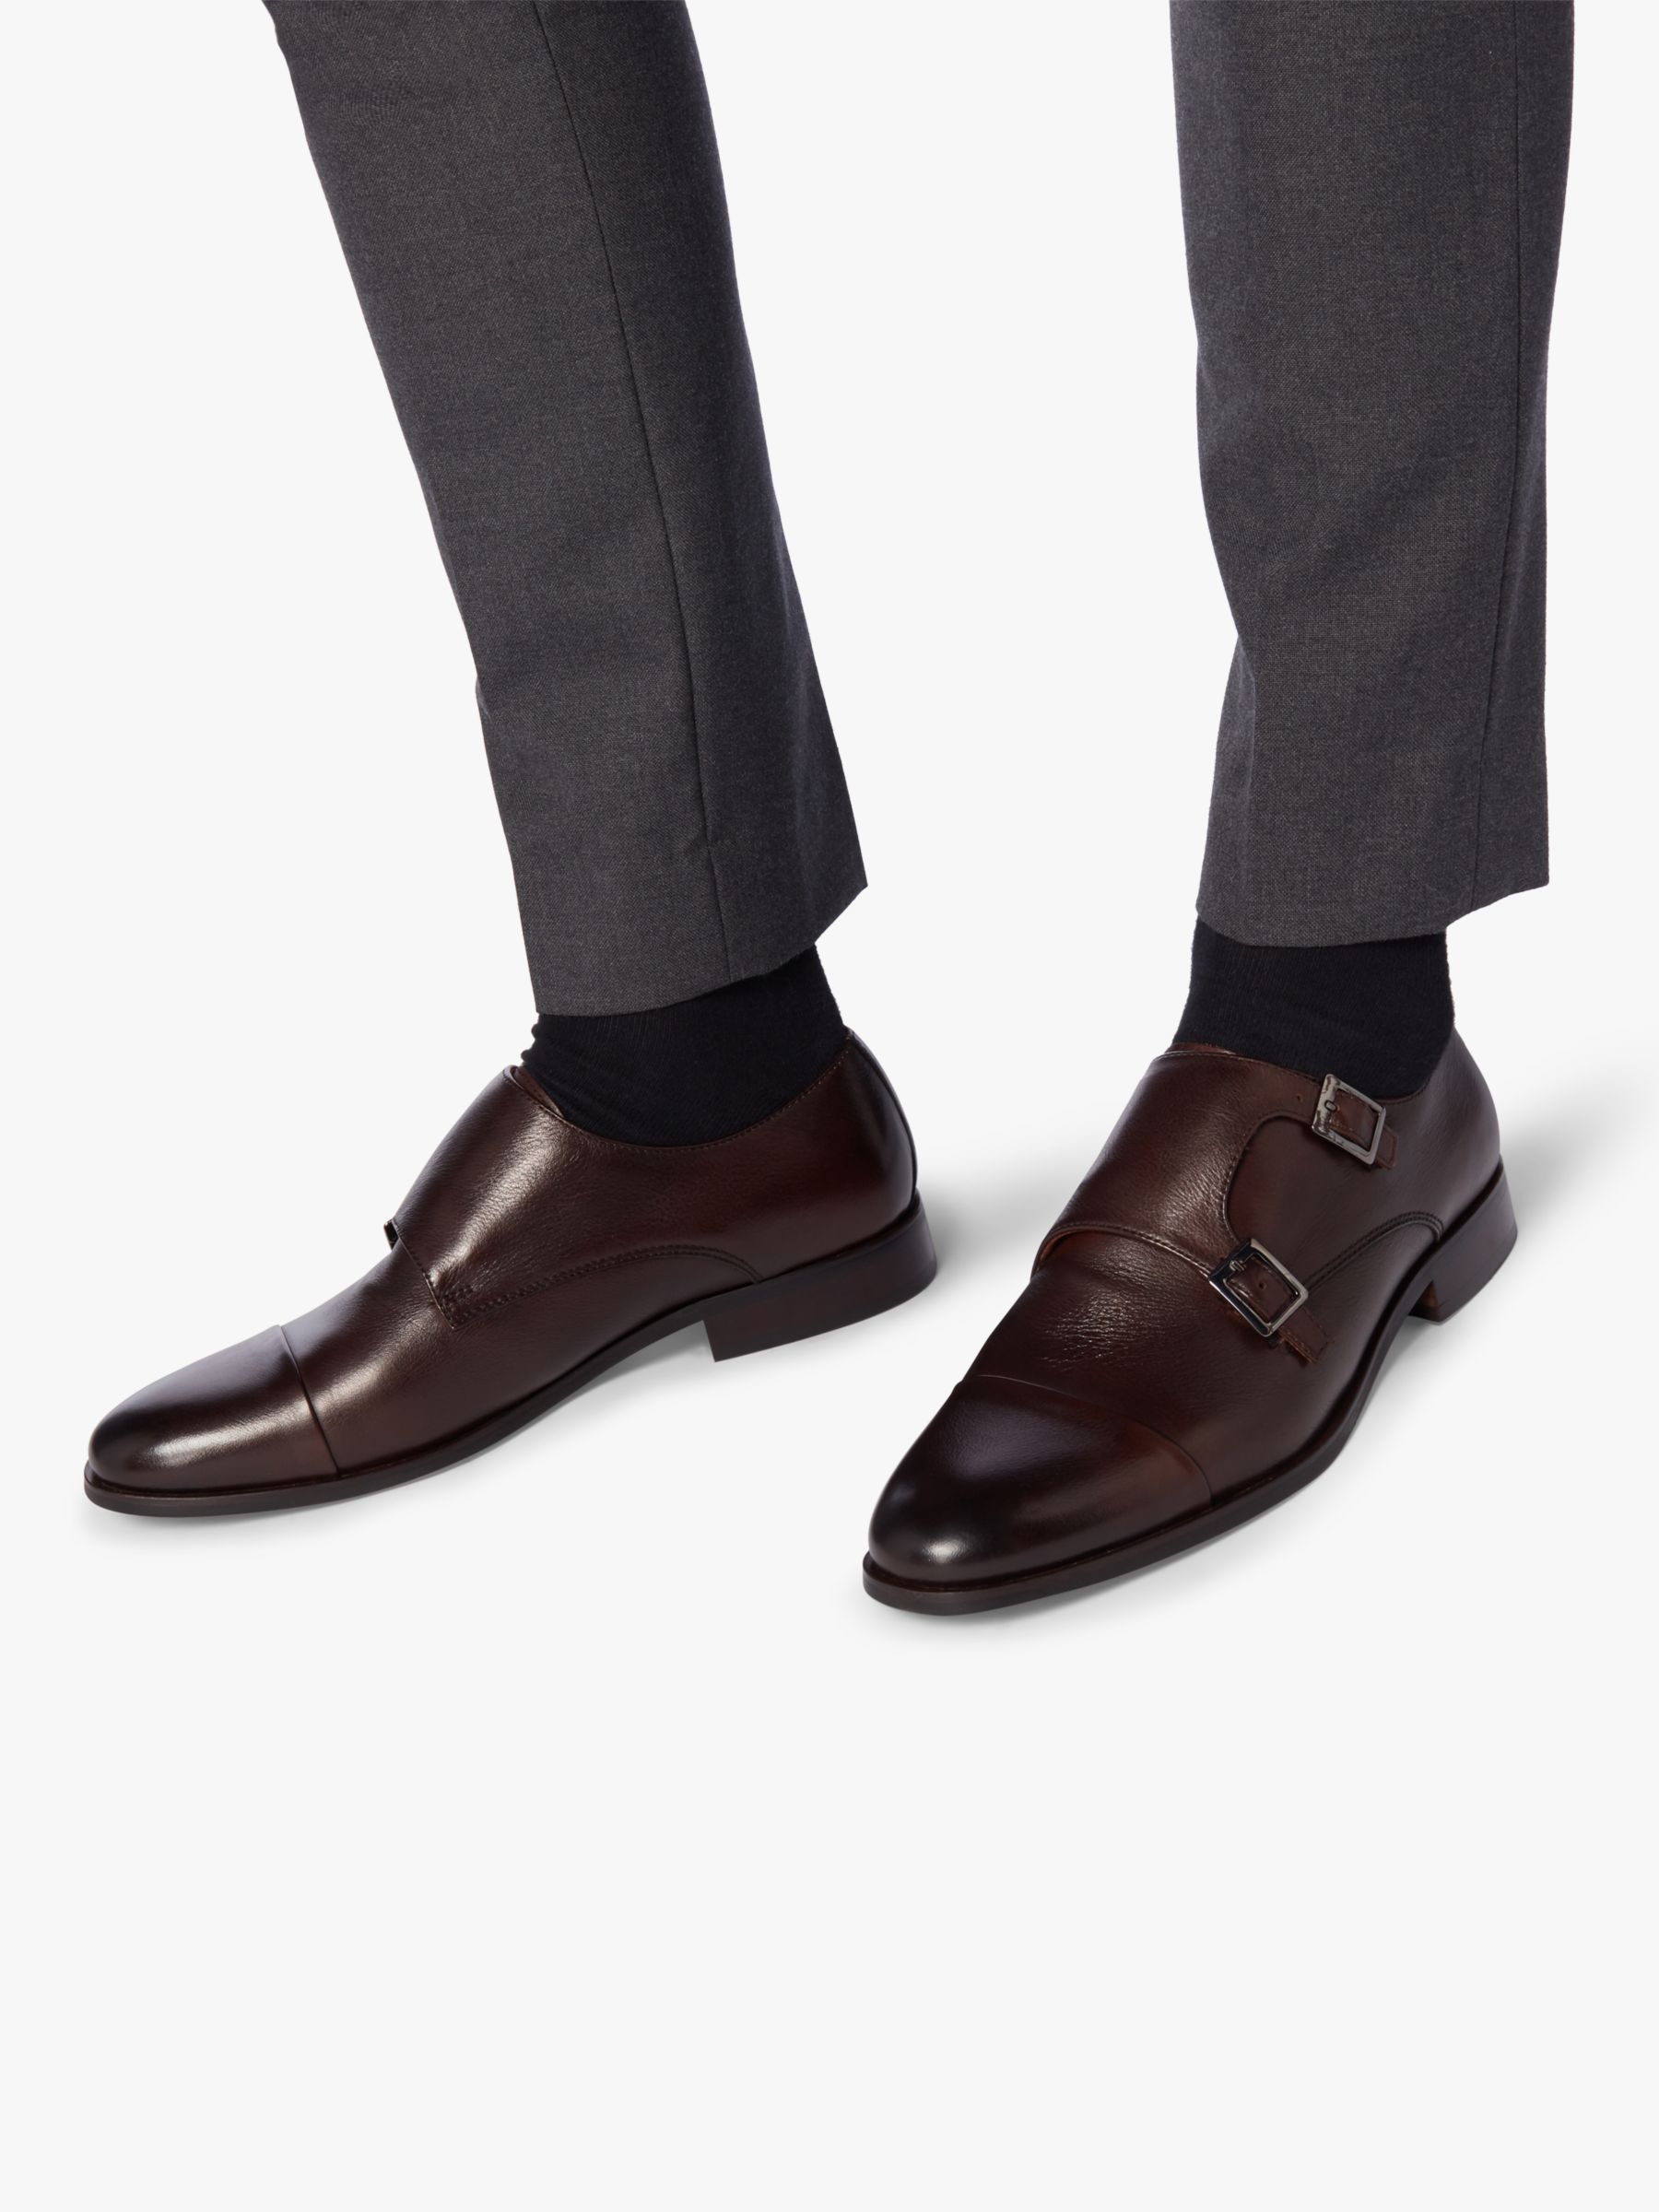 Dune Prise Leather Double Strap Monk Shoes, Brown at John Lewis & Partners